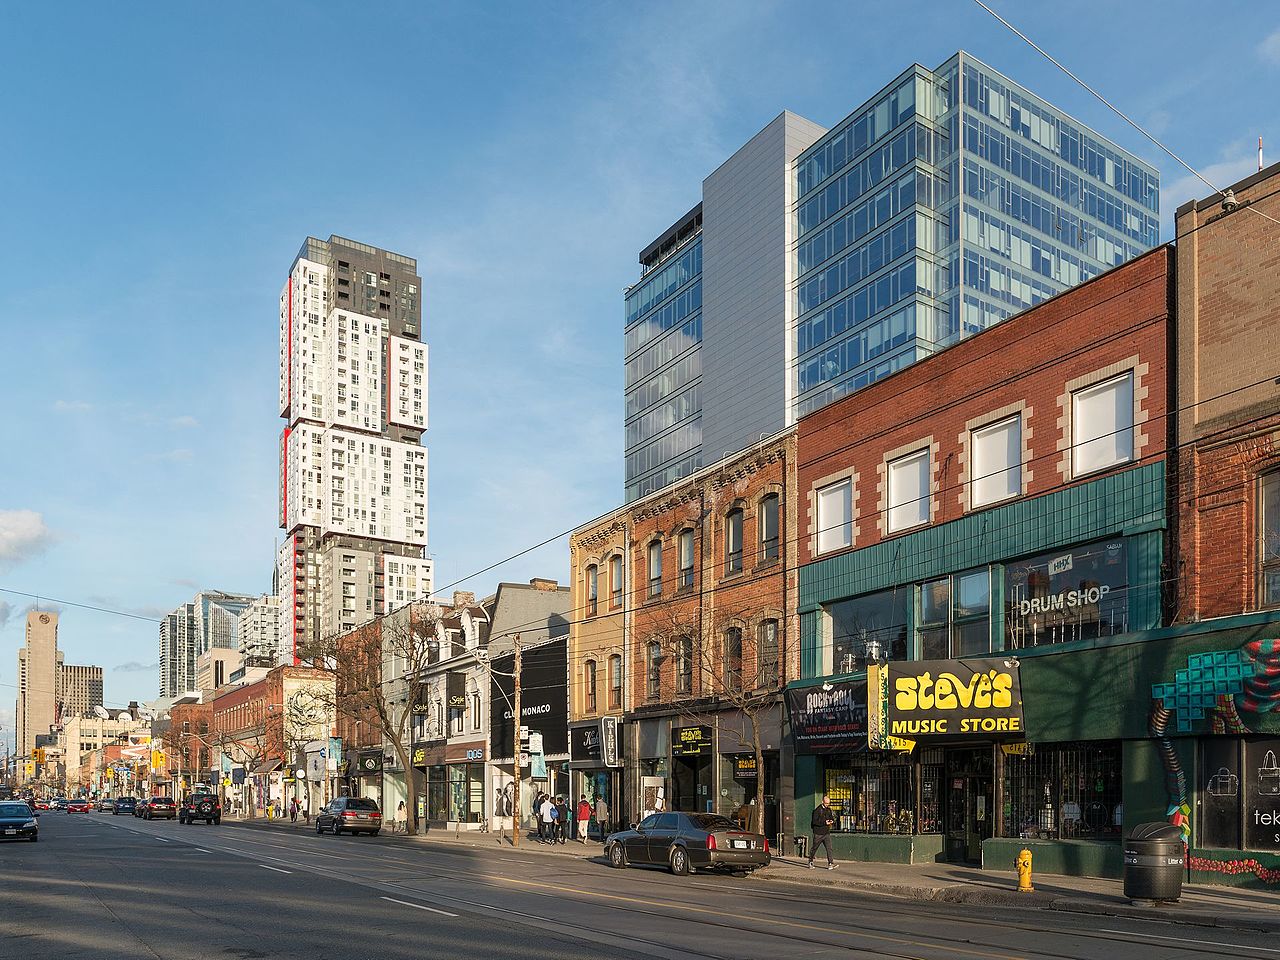 File:Queen St W, Toronto, as seen between Spadina Ave and Peter St